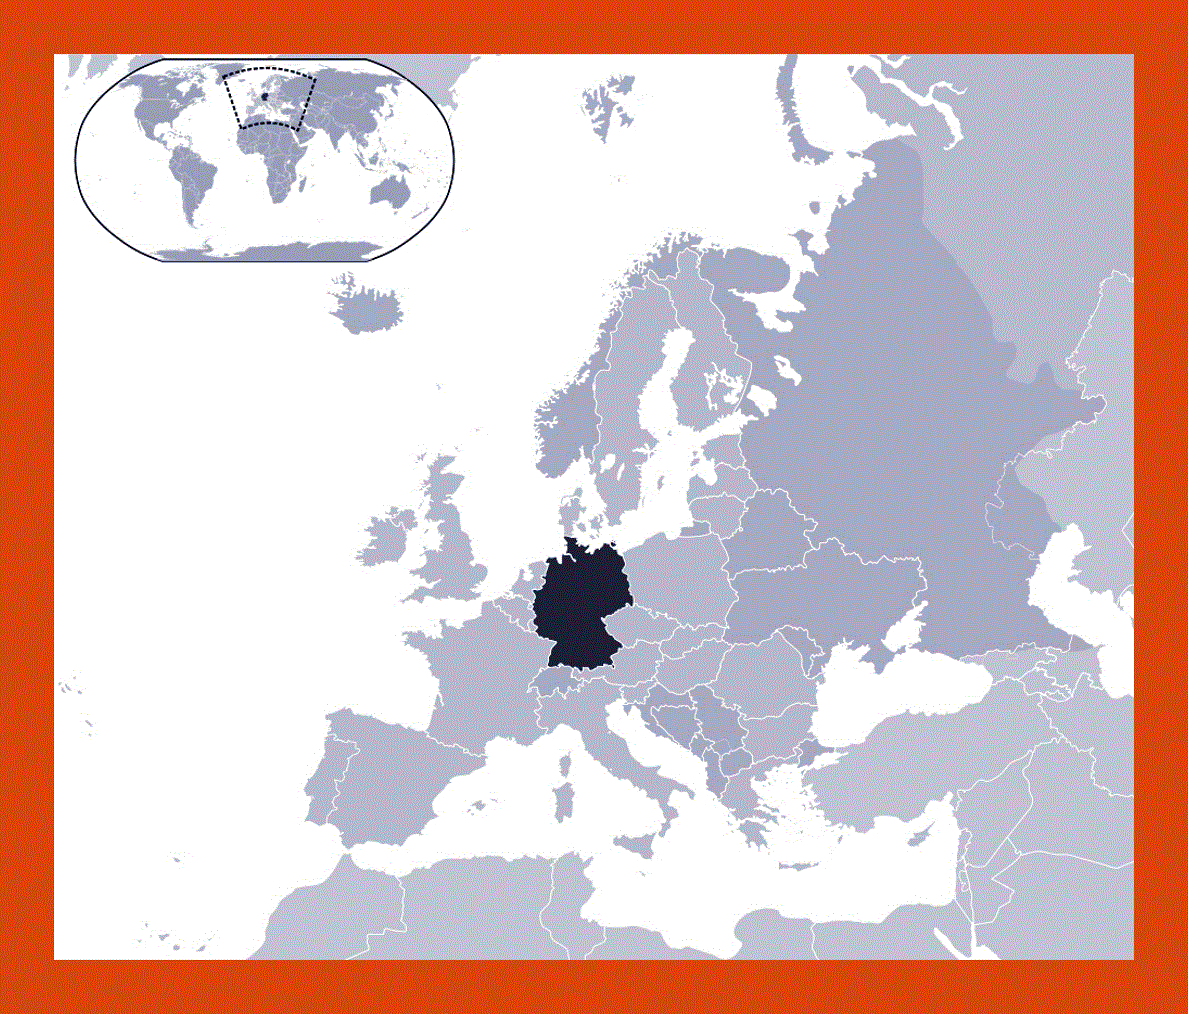 Location map of Germany